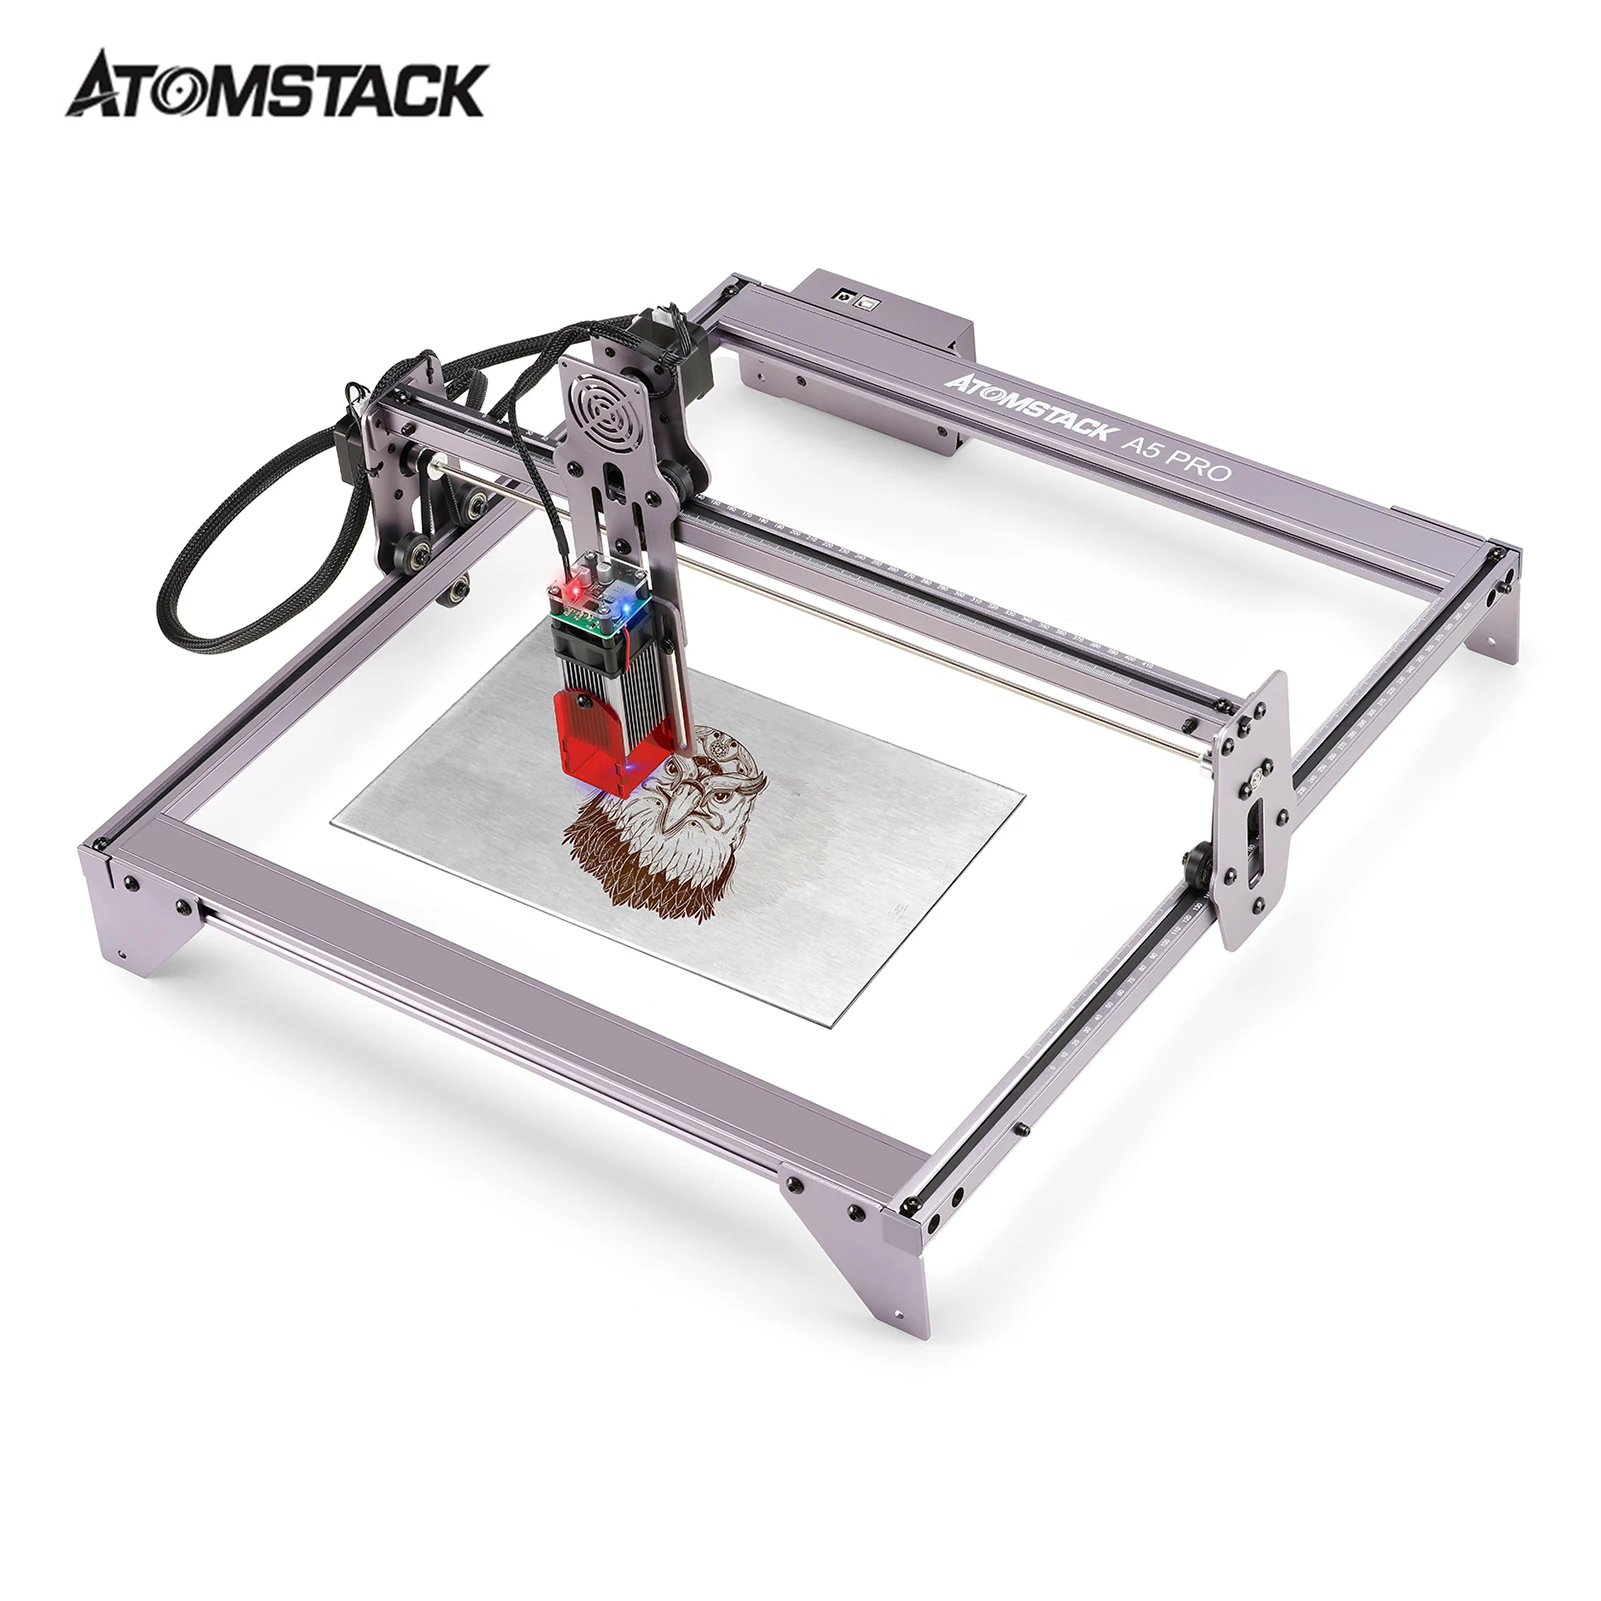 

ATOMSTACK A5 20W A5 Pro 40W Laser Engraver CNC 410*400mm Carving Area Desktop DIY Engraving Cutting Machine for Metal Wood